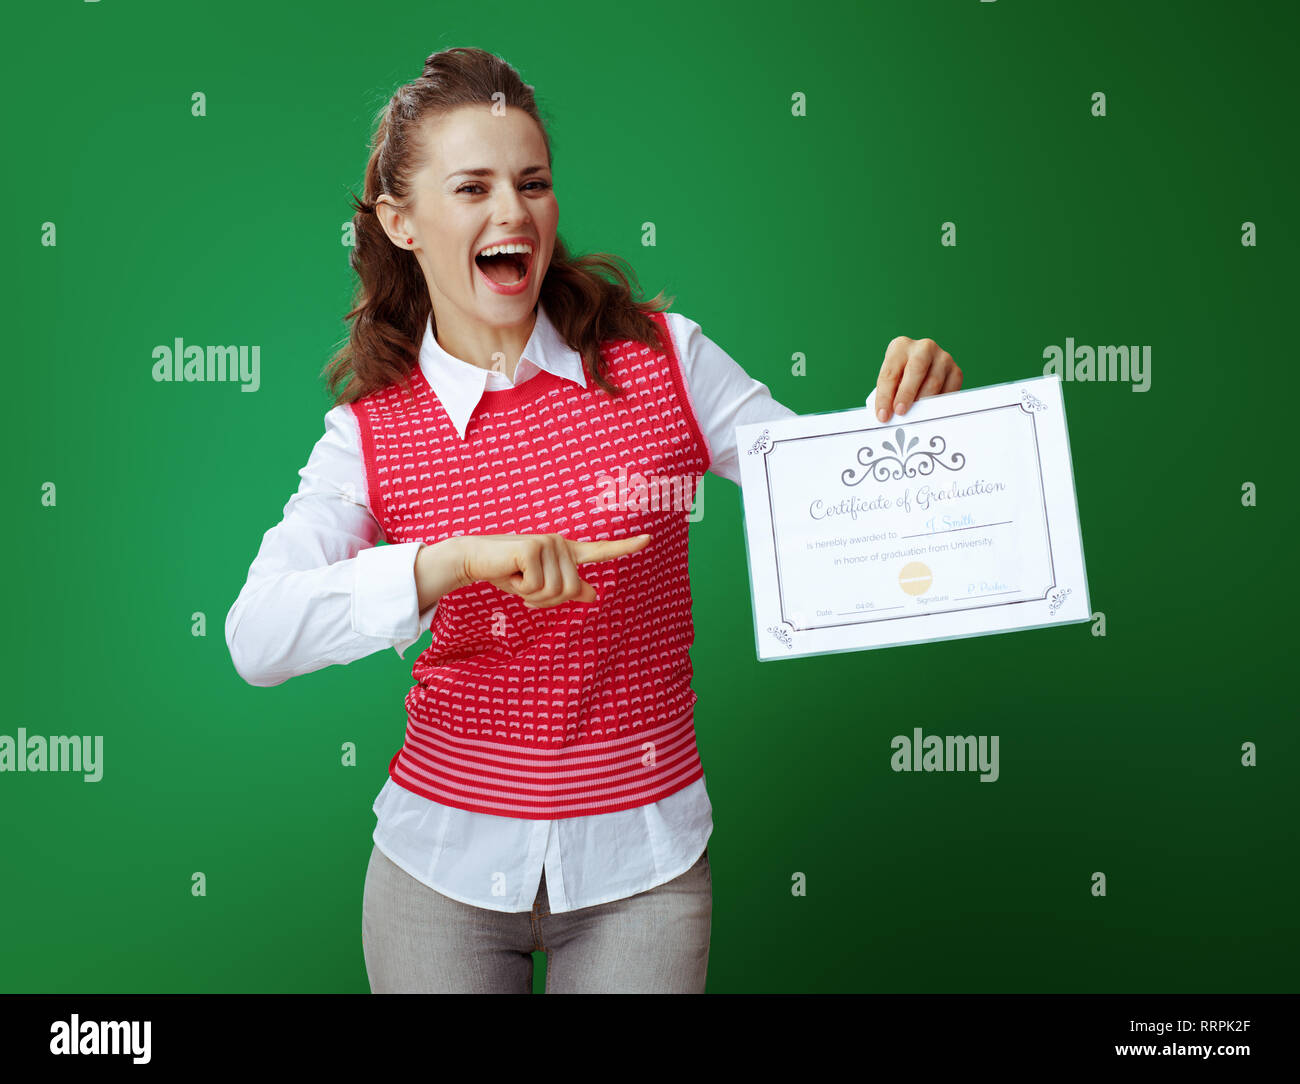 smiling modern student in grey jeans and pink sleeveless shirt pointing at Certificate of Graduation against chalkboard green background. Stock Photo